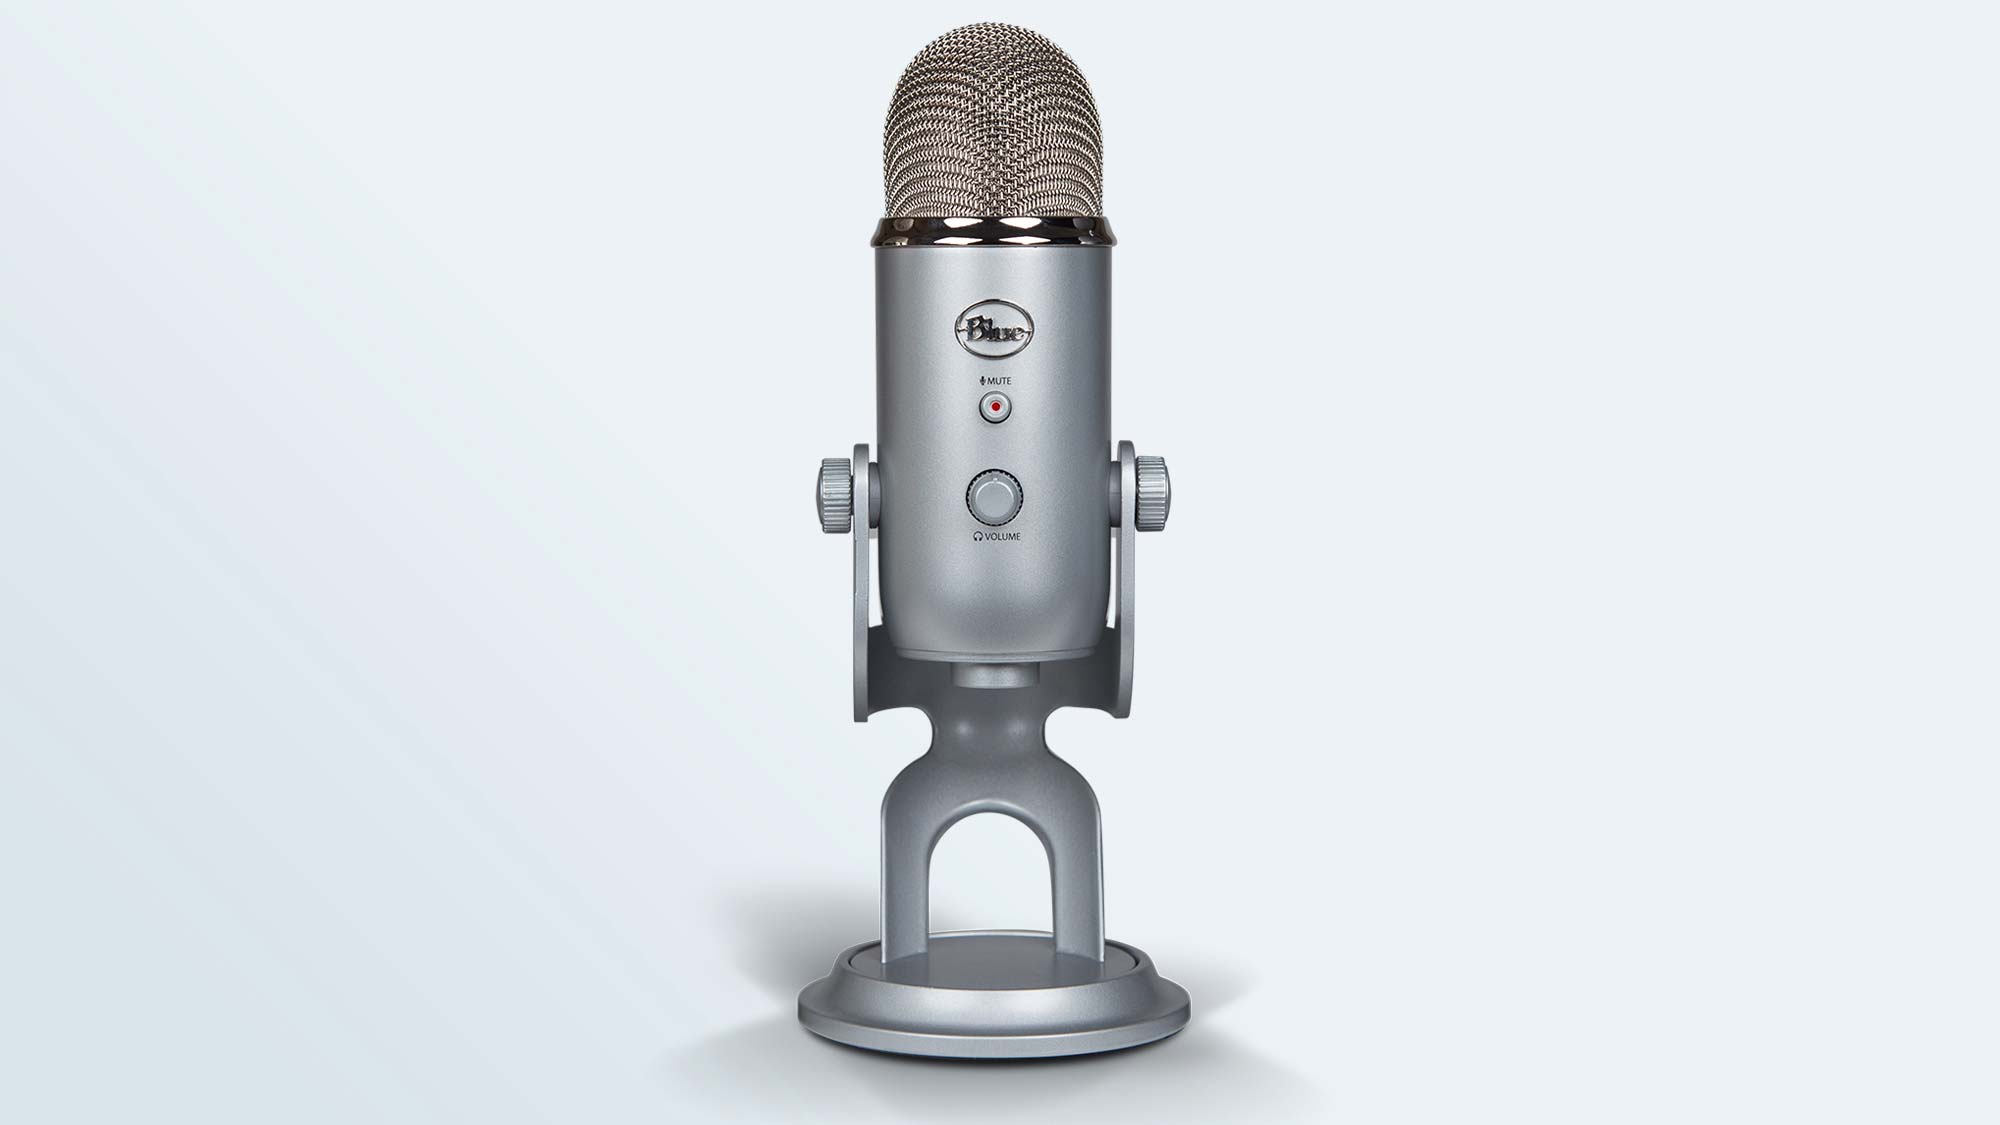 The Blue Yeti standing alone in the No. 1 spot